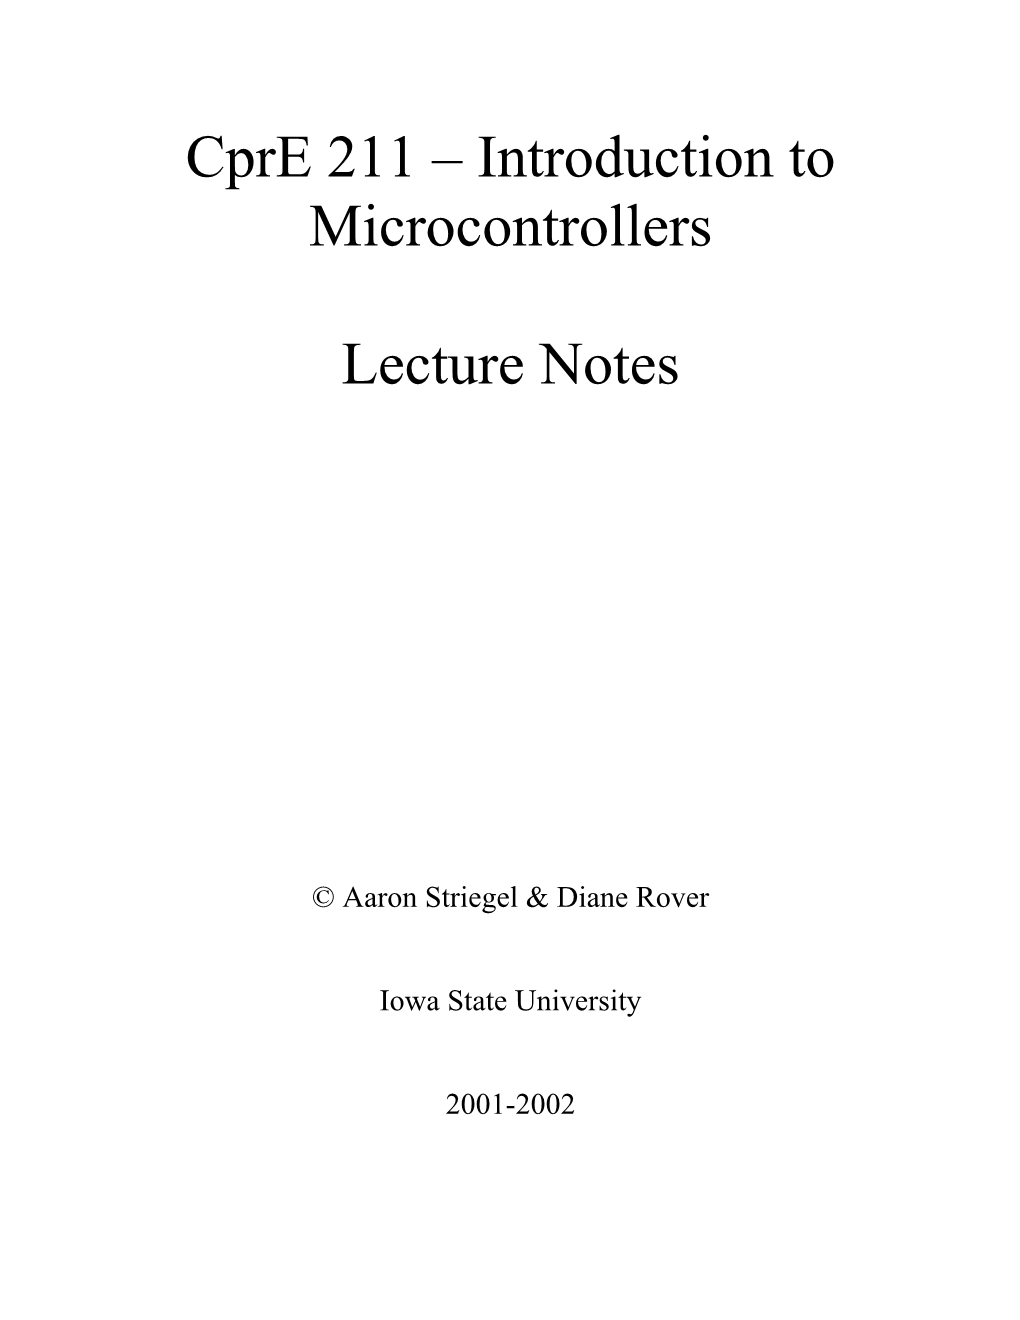 Cpre 211 – Introduction to Microcontrollers Lecture Notes